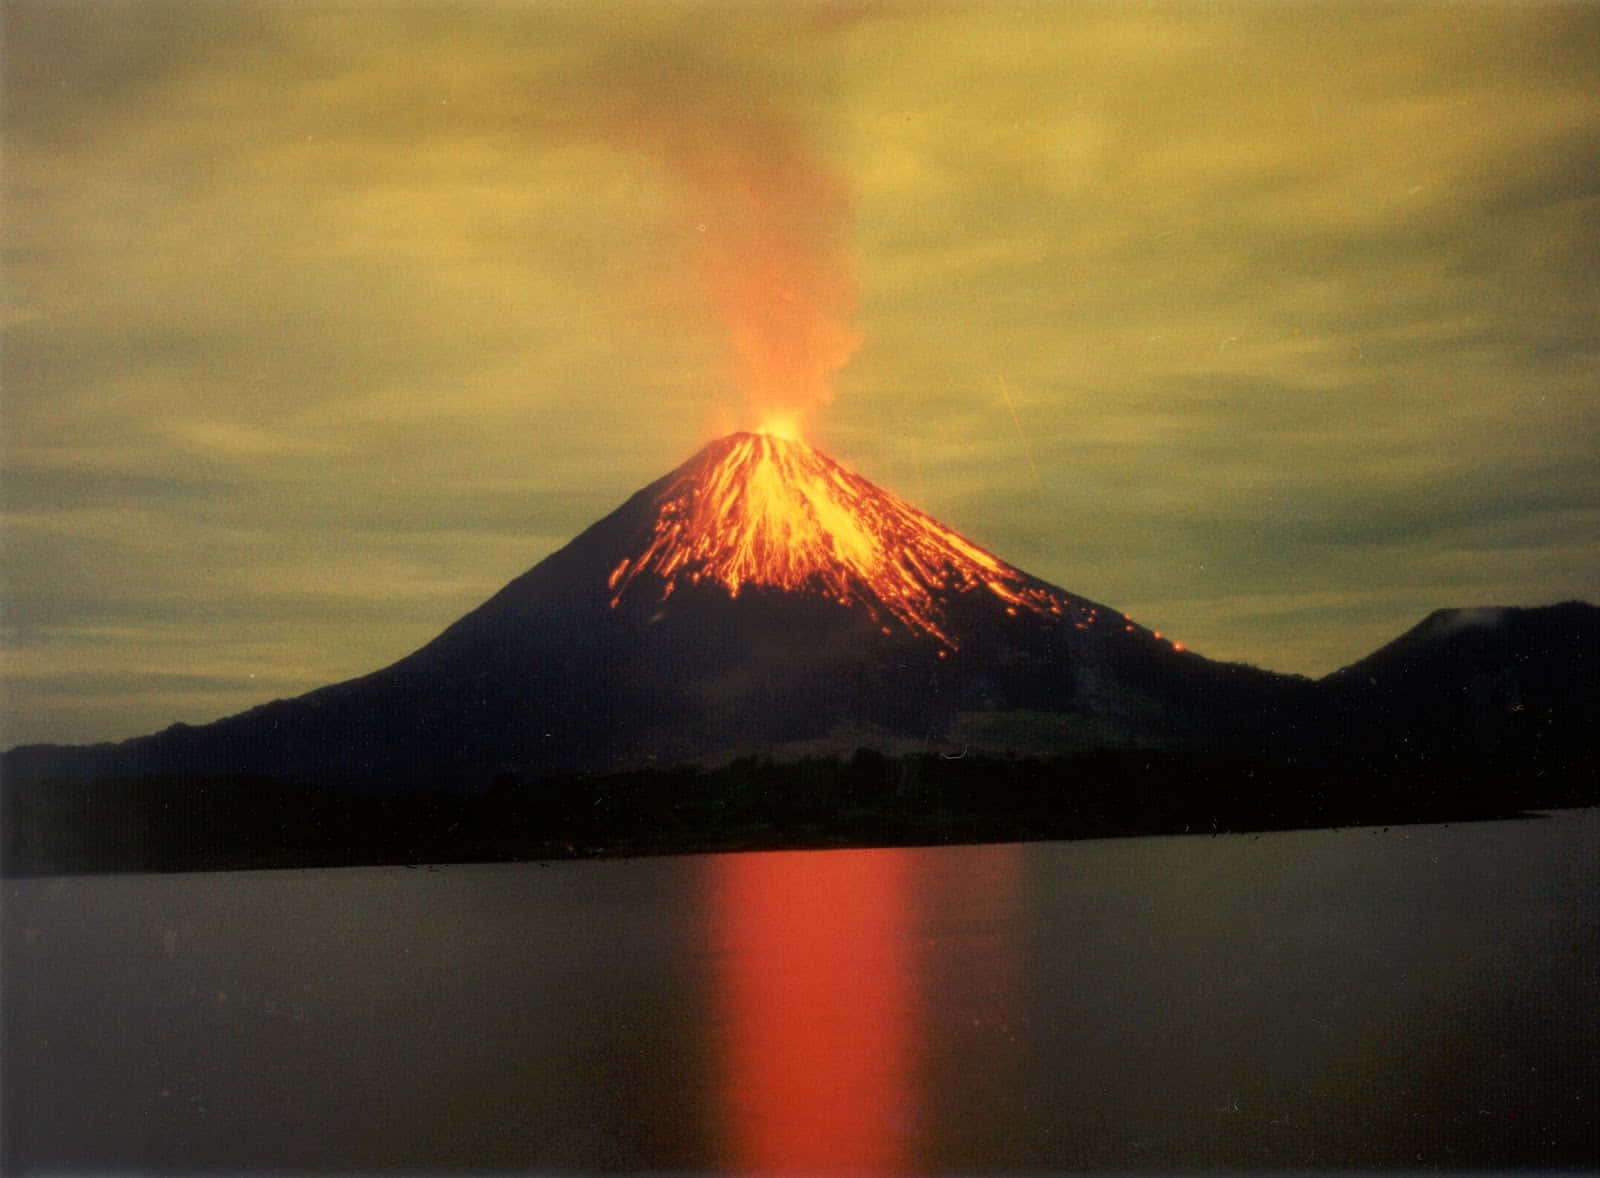 "The Wilderness of a Volcano"